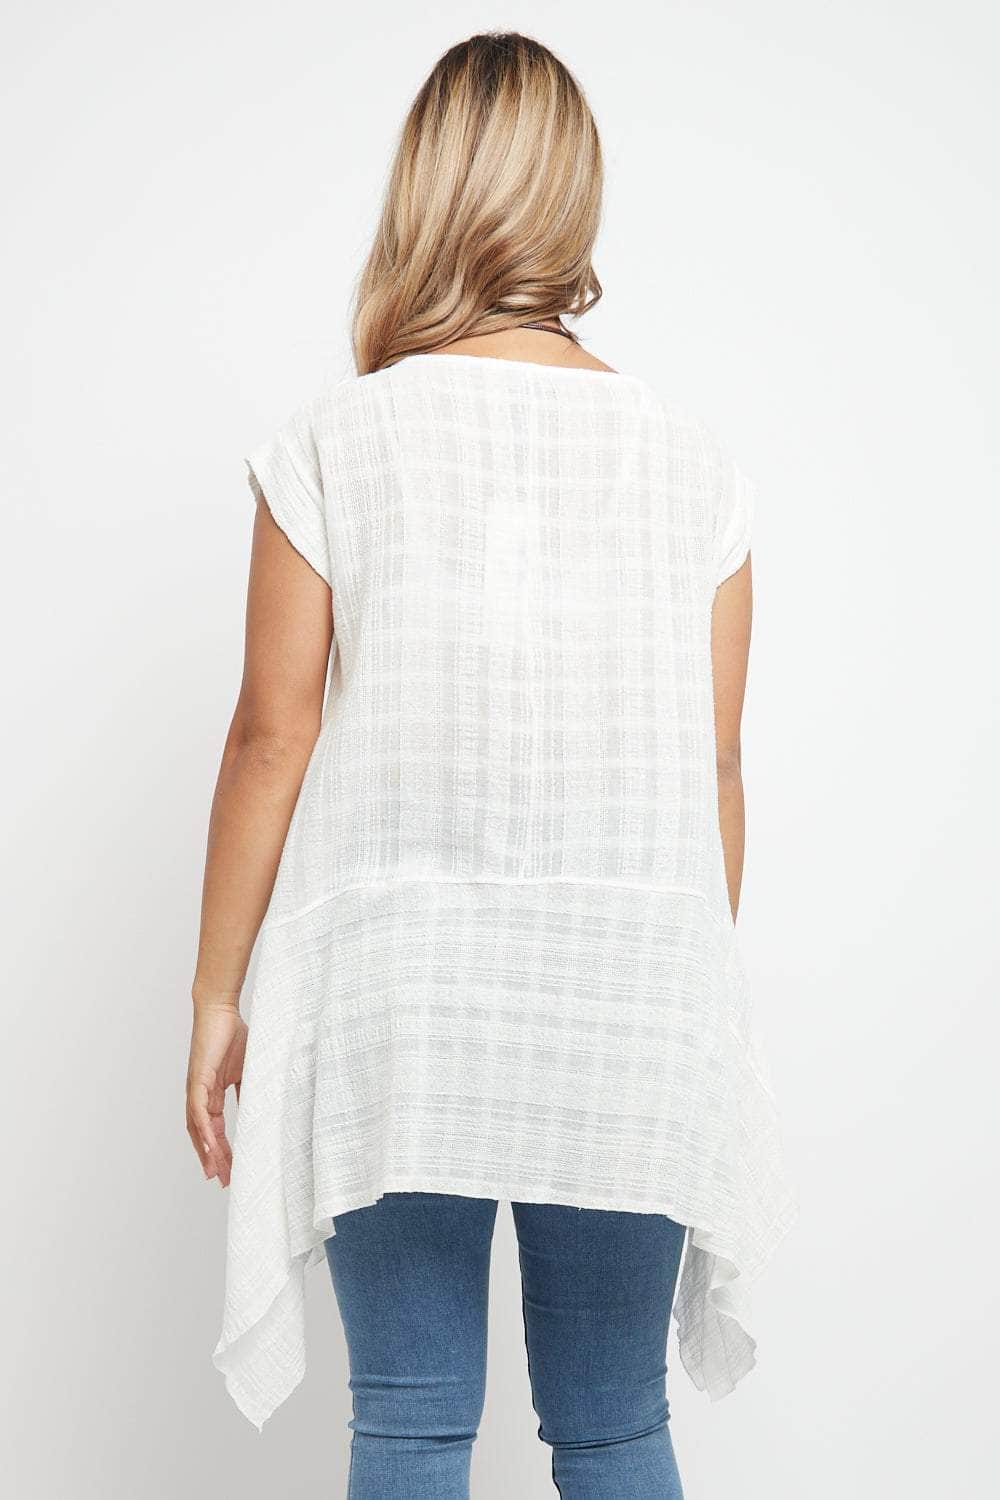 Saloos Top Relaxed Cut Woven Cotton Top with Necklace